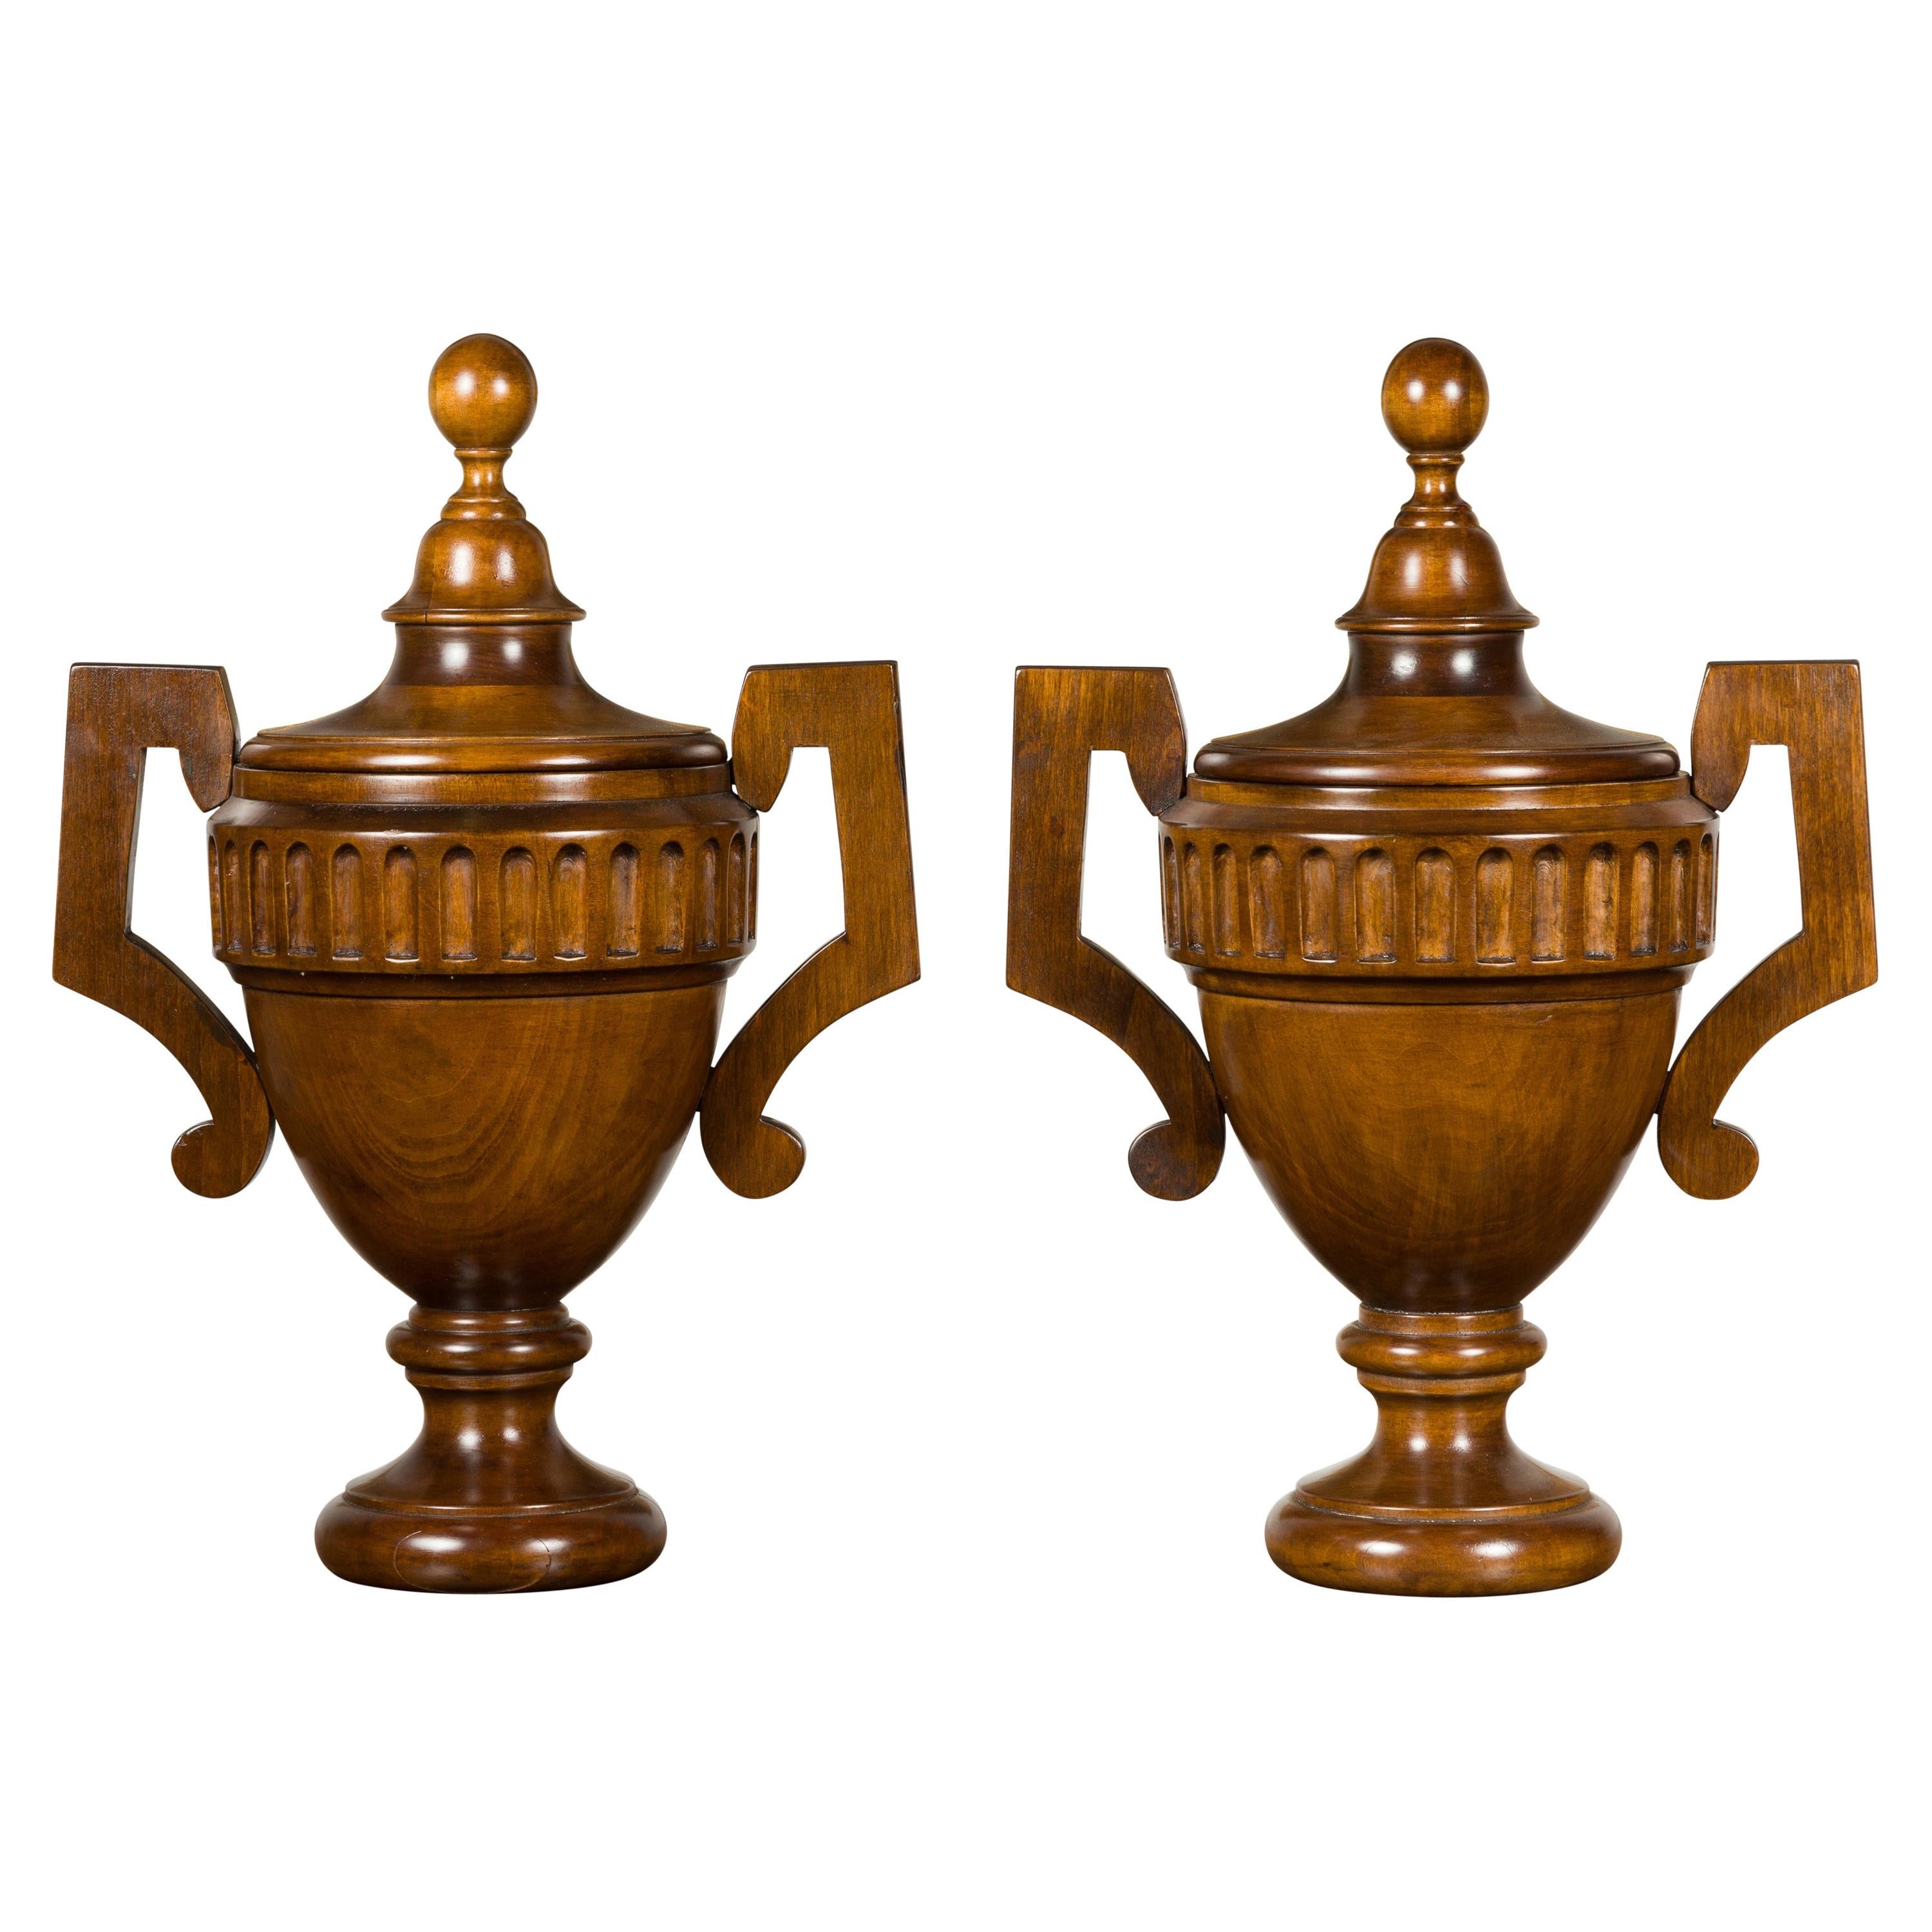 Pair of Midcentury English Carved Walnut Lidded Urns with Large Handles For Sale